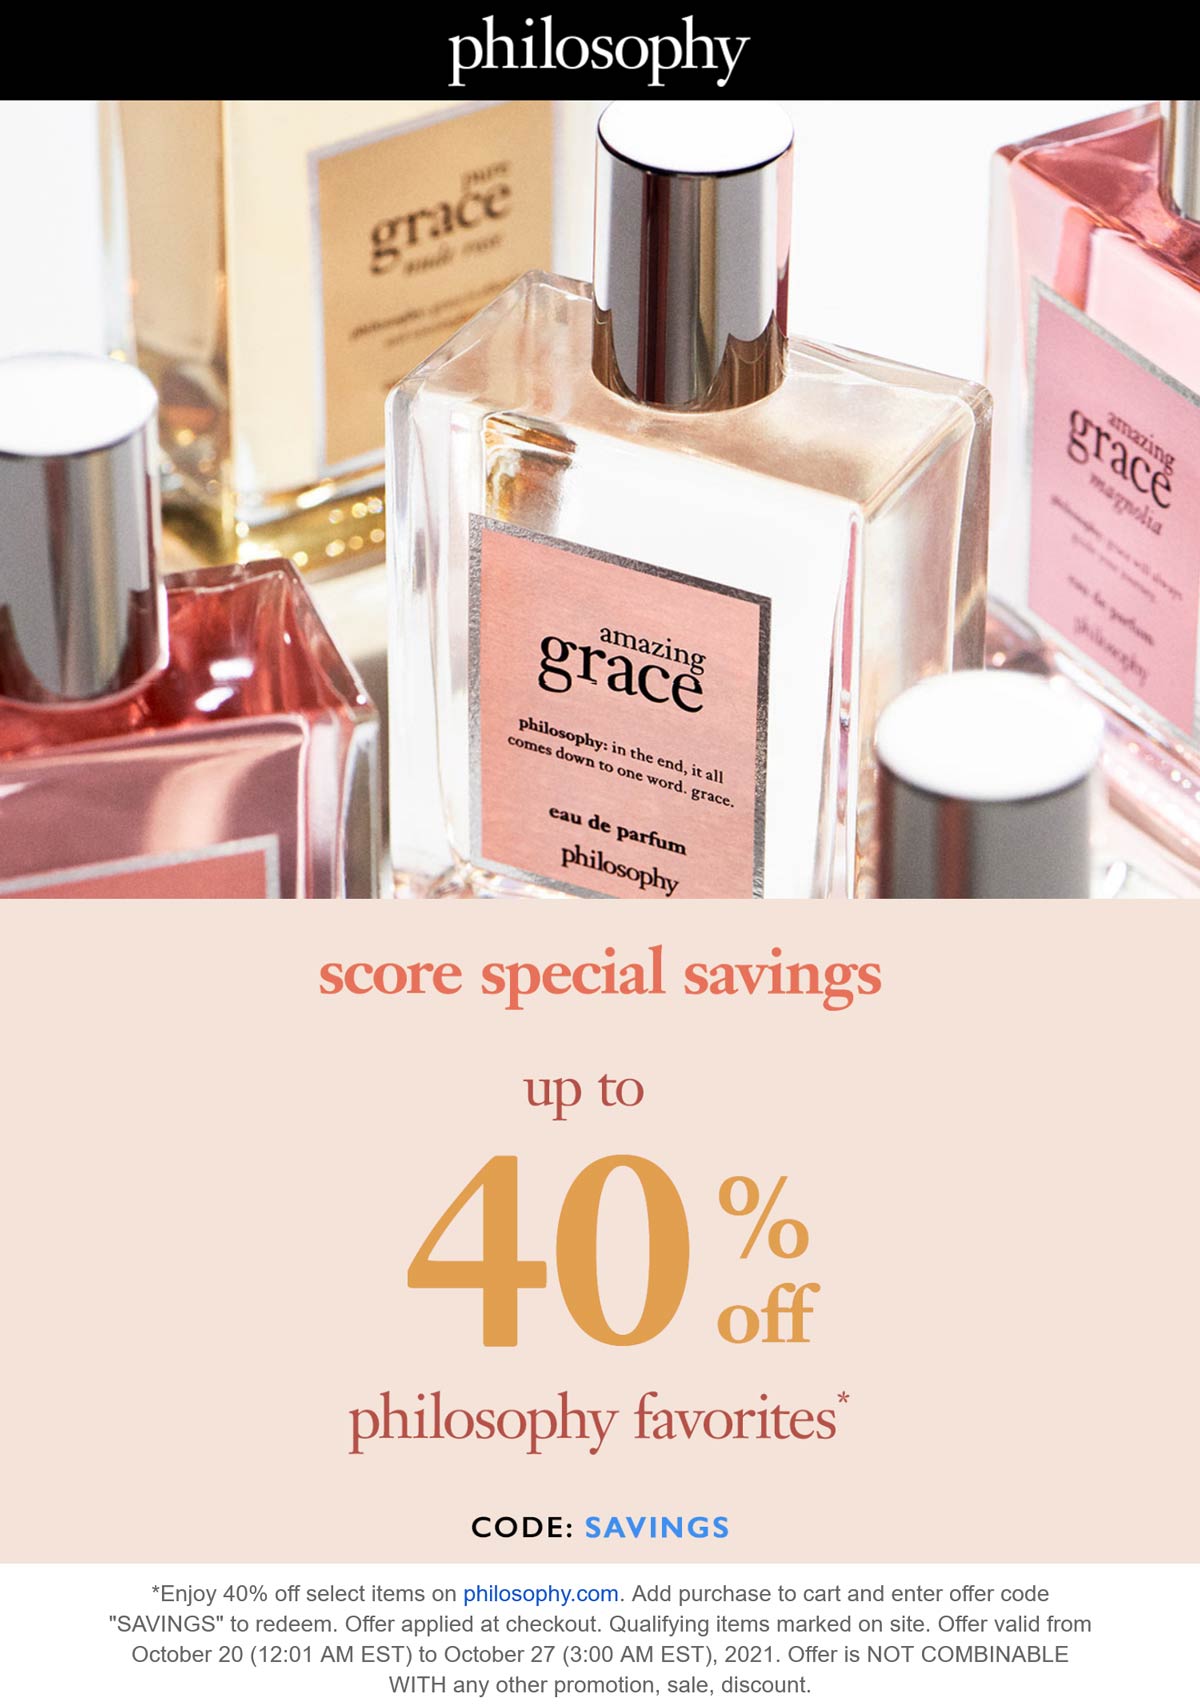 Philosophy stores Coupon  40% off favorites at Philosophy via promo code SAVINGS #philosophy 